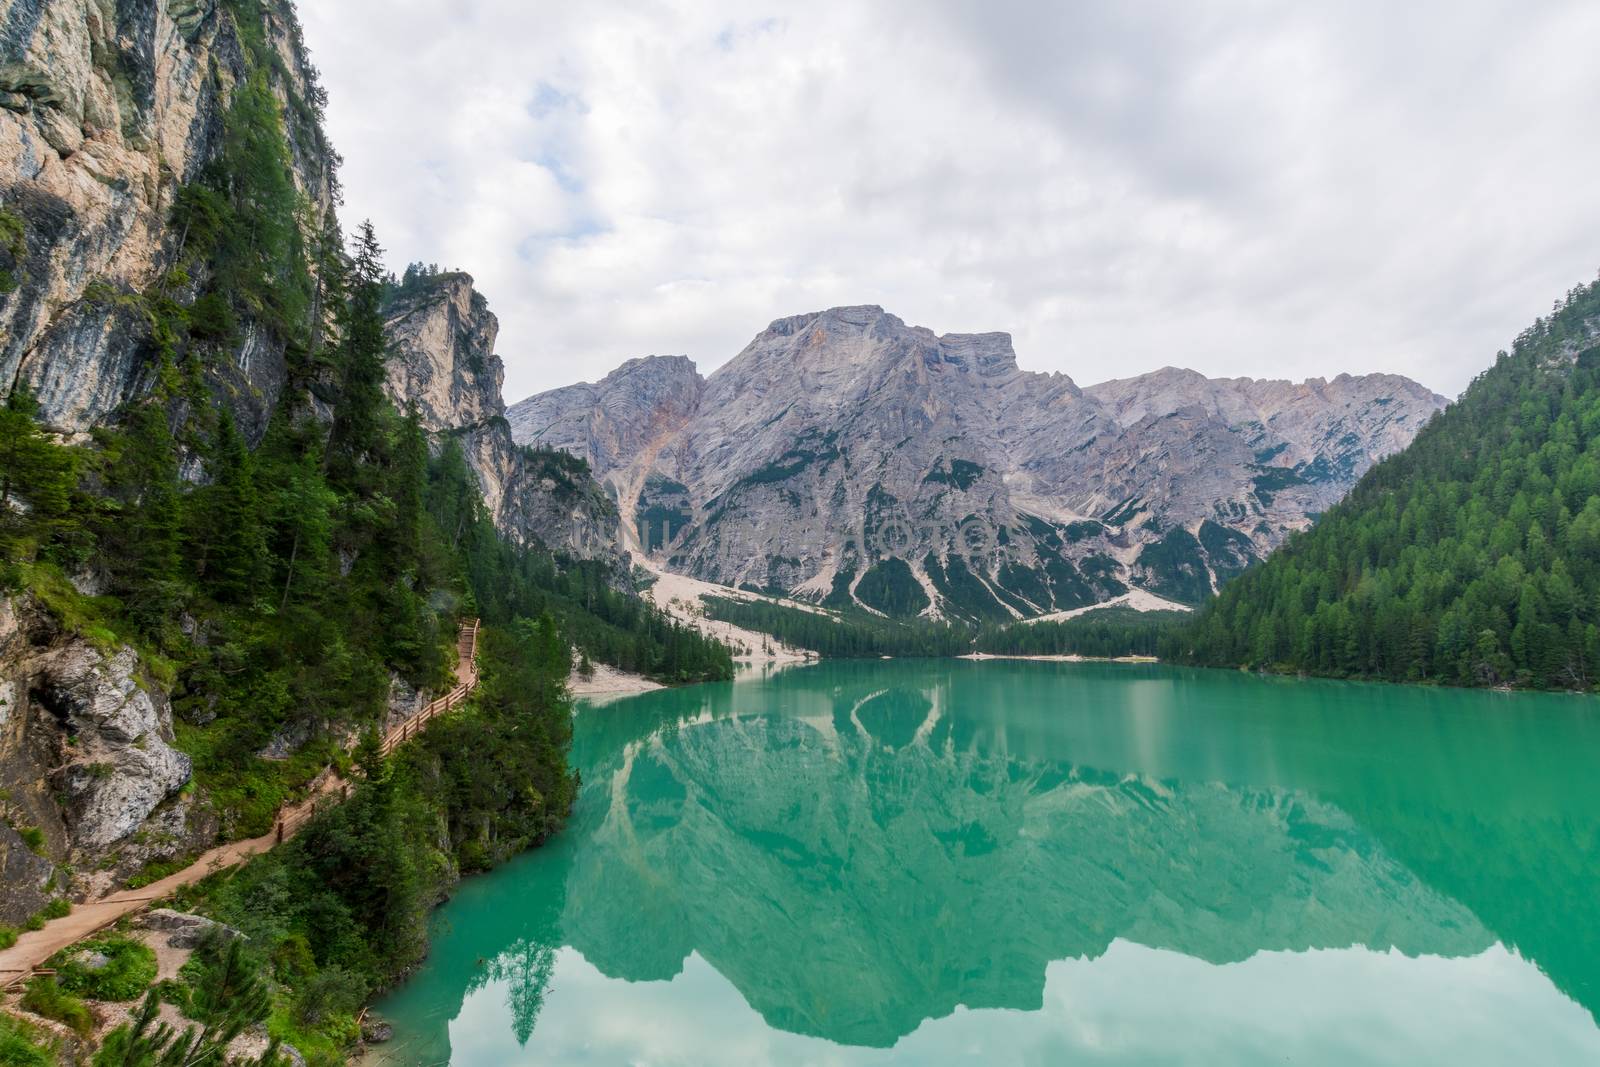 View of Lake Braies and a path that runs alongside it by brambillasimone